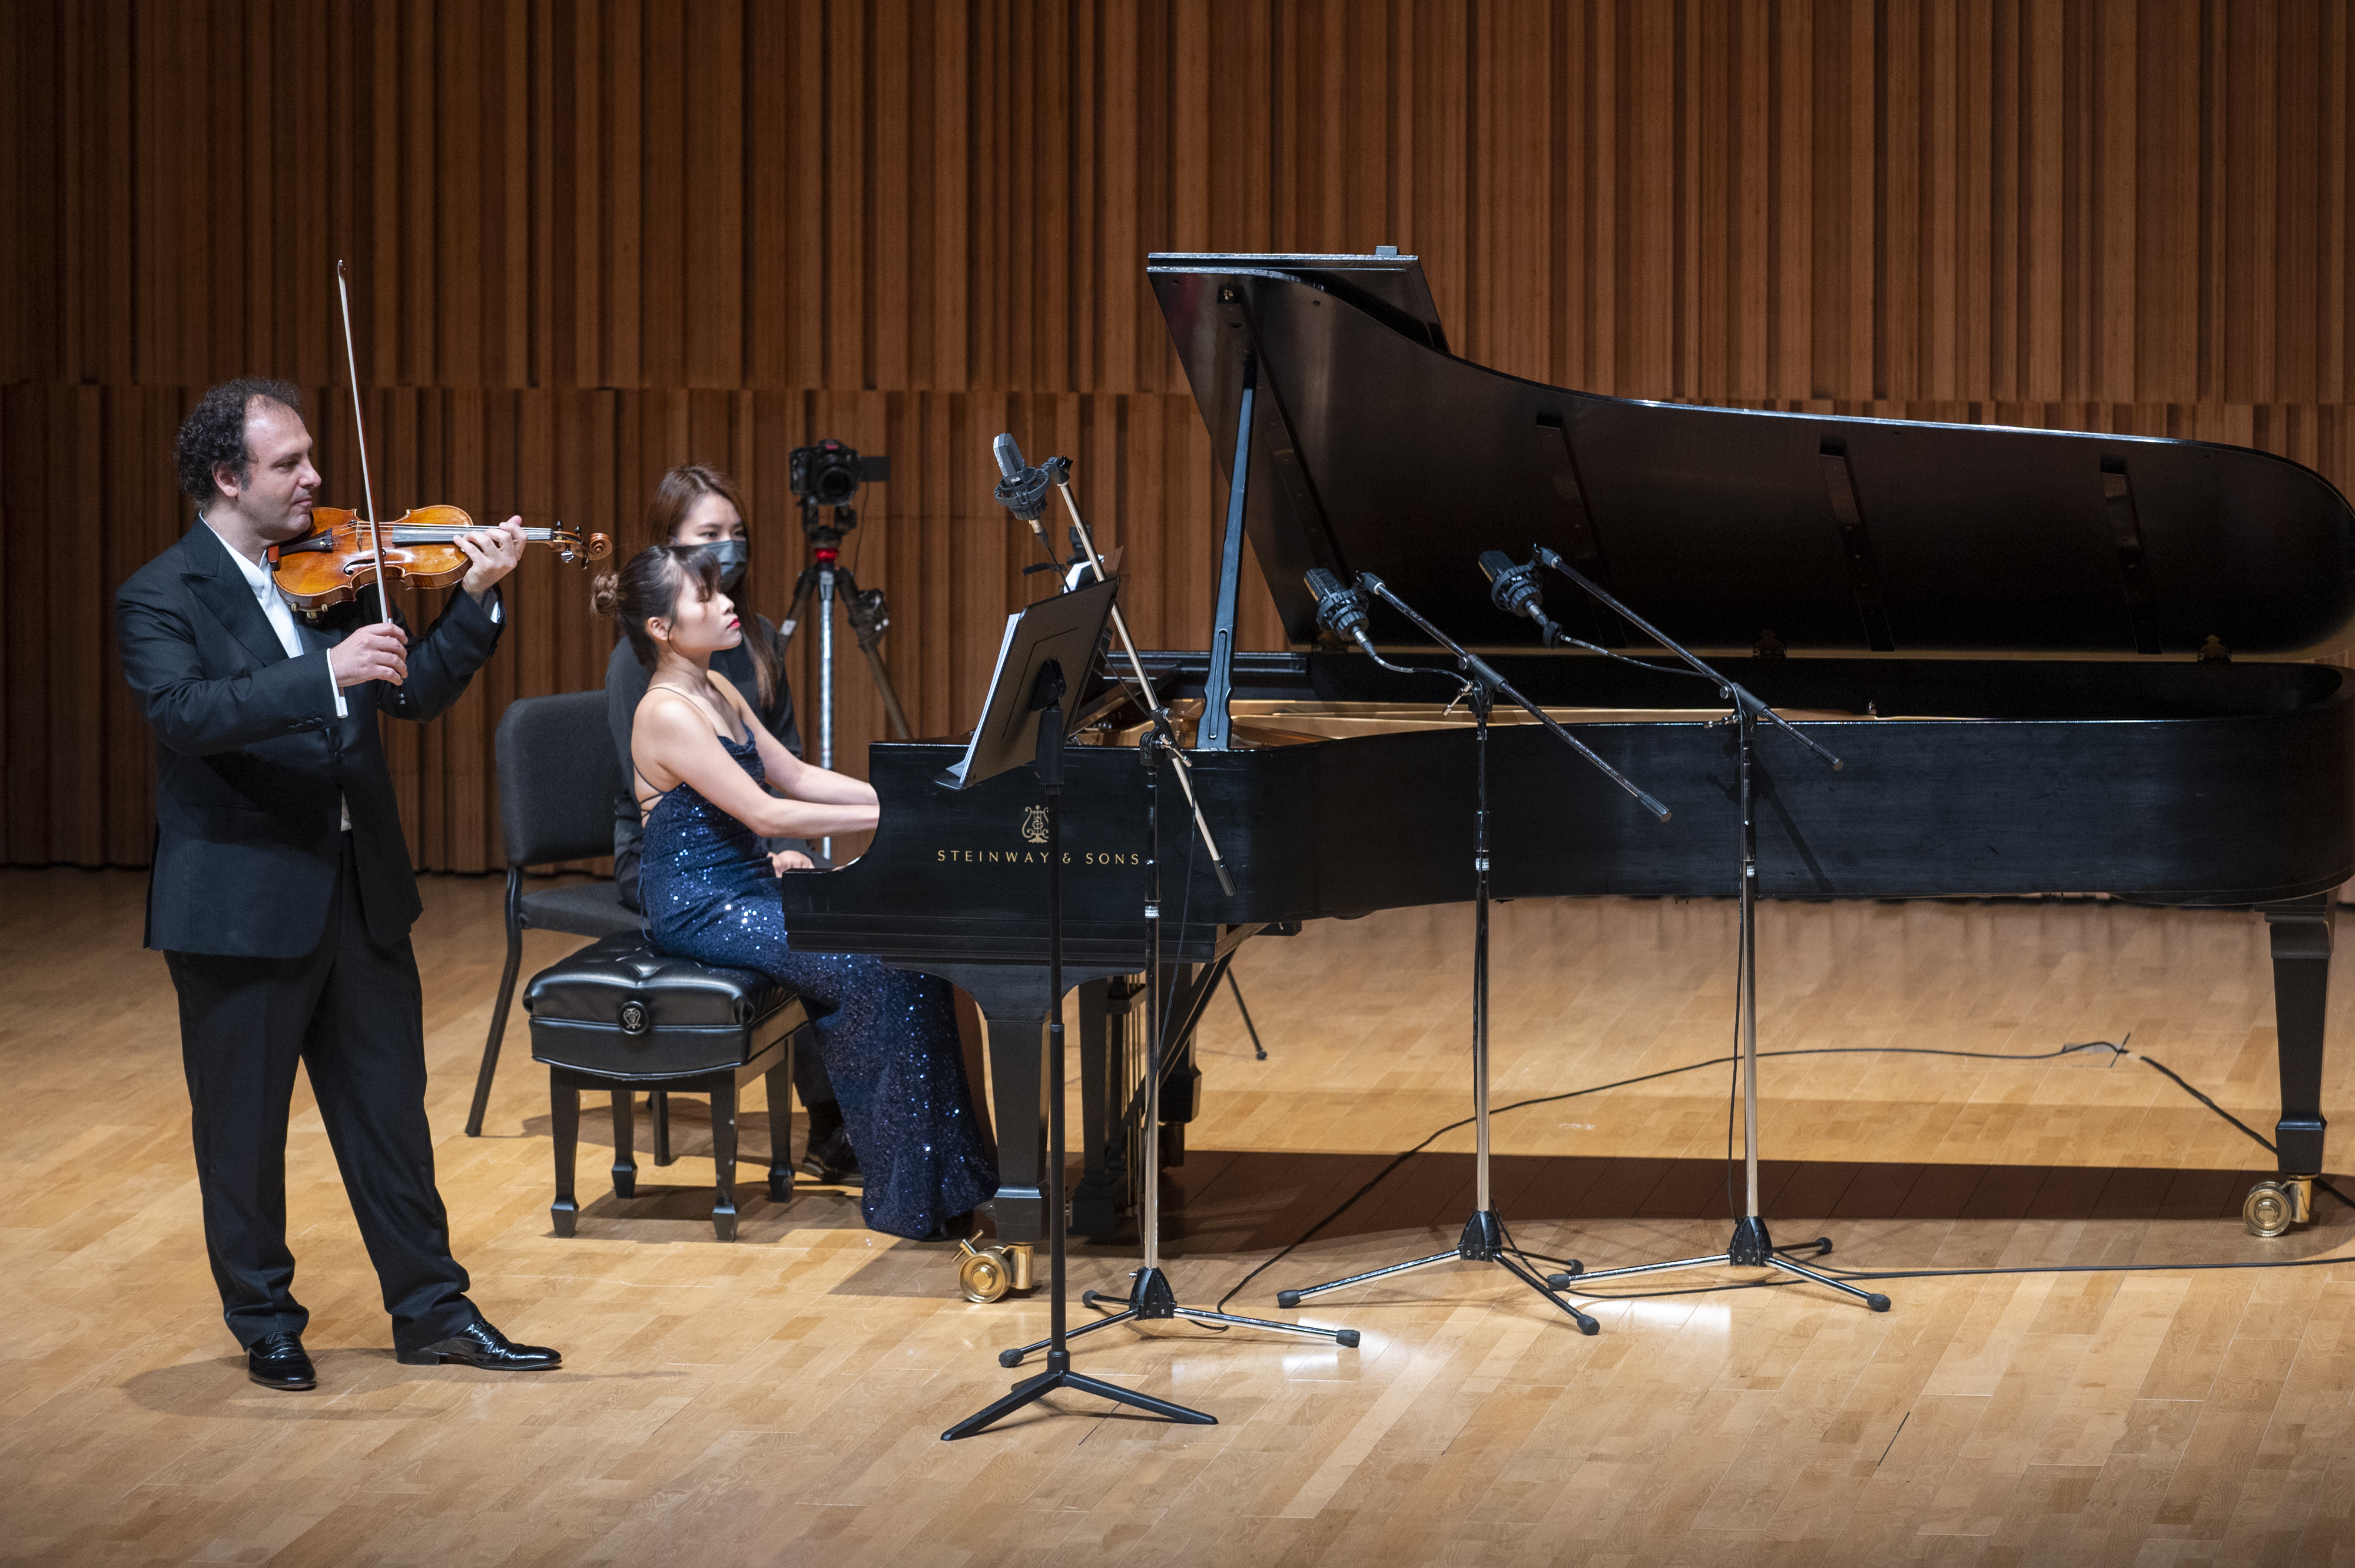 A Celebration of Italian and French Masterpieces for Violin and Piano – with Gian Paolo Peloso and Rachel Cheung